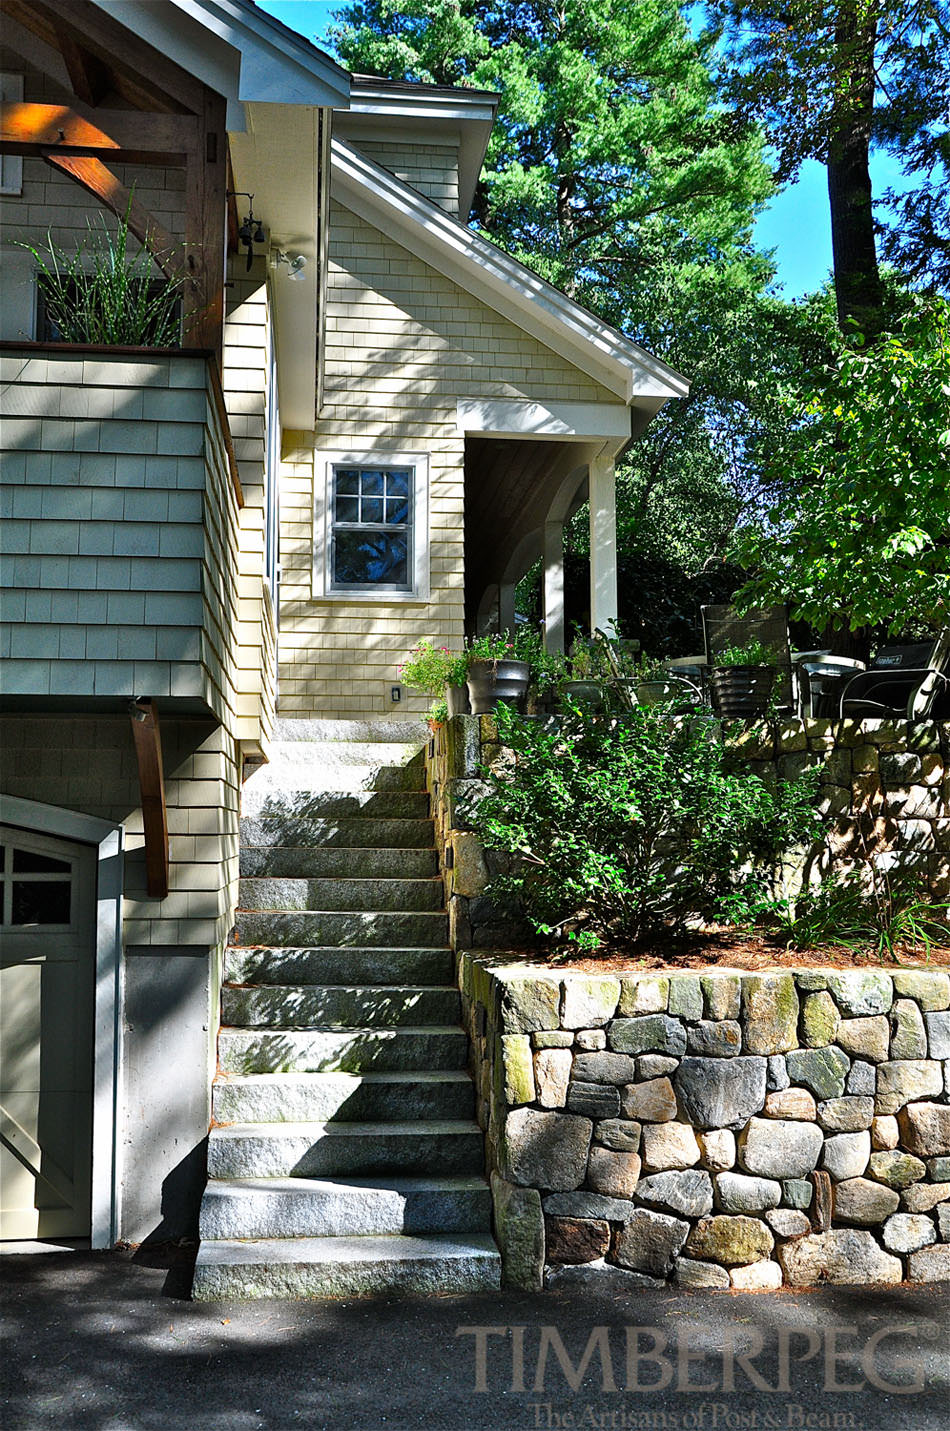 Wellesley, MA (5570) exterior view featuring stone staircase